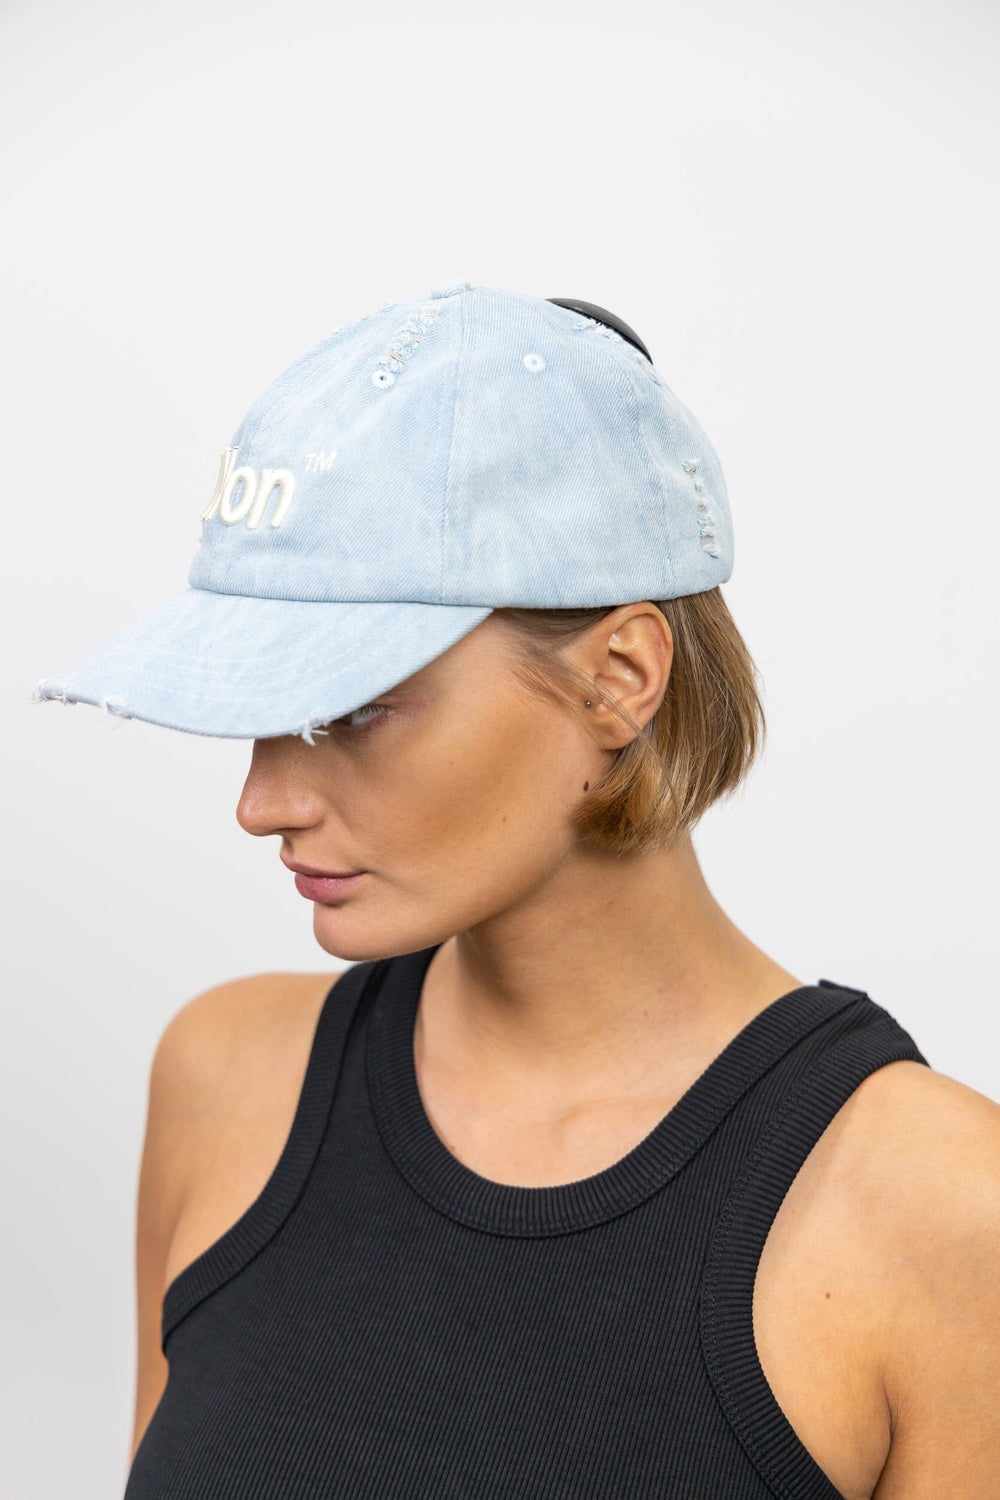 Denim Iniquity - PRE ORDER 🖤 the bestselling Anine Bing Jeremy Cap is  coming back!! Get in quick and pre order now >>> limited stock coming!! • •  • #aninebing #aninebingmuse #cap #